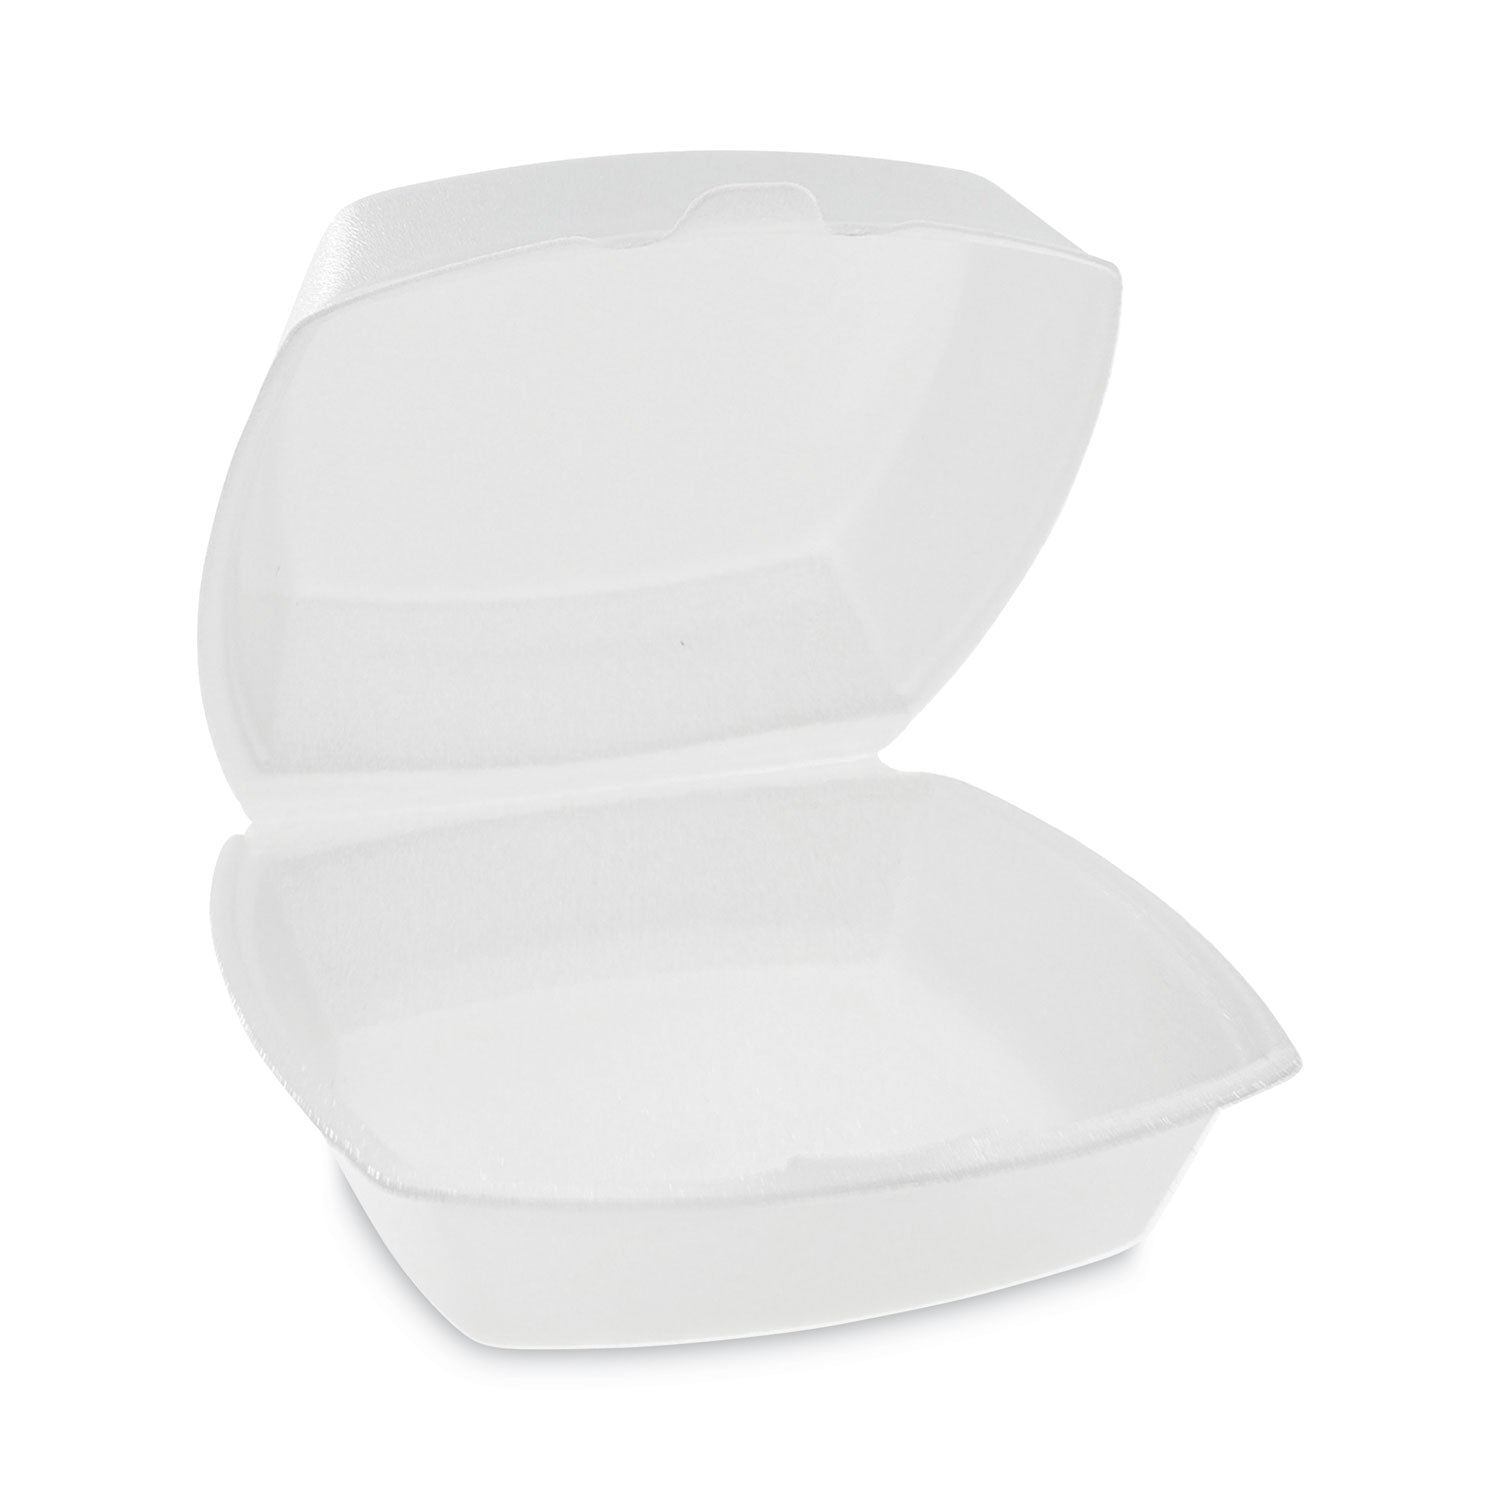 foam-hinged-lid-container-single-tab-lock-638-x-638-x-3-white-500-carton_pctyth100800000 - 2